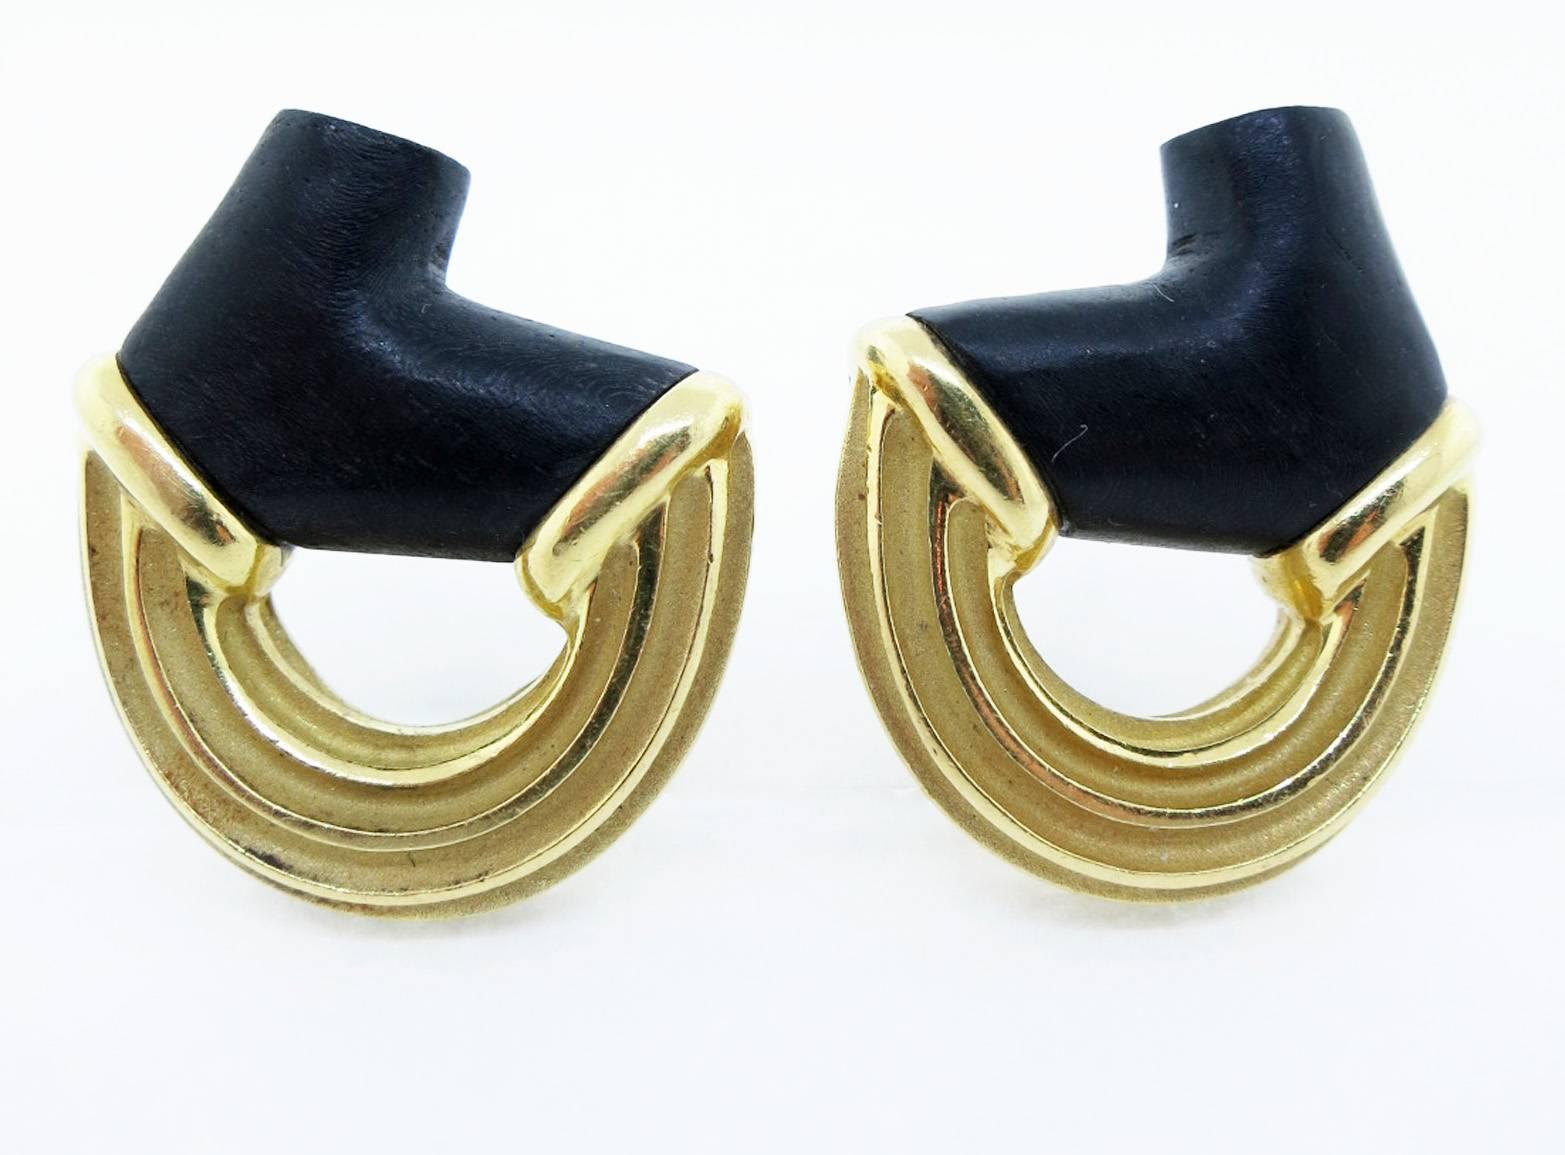 Stunning contemporary opposing design  18kt. earrings made by Christopher Walling. Each earring is a combination of matte and high finish 18kt. yellow gold with a matte finish organic form onyx. Clip back posts can be added. Original box included.